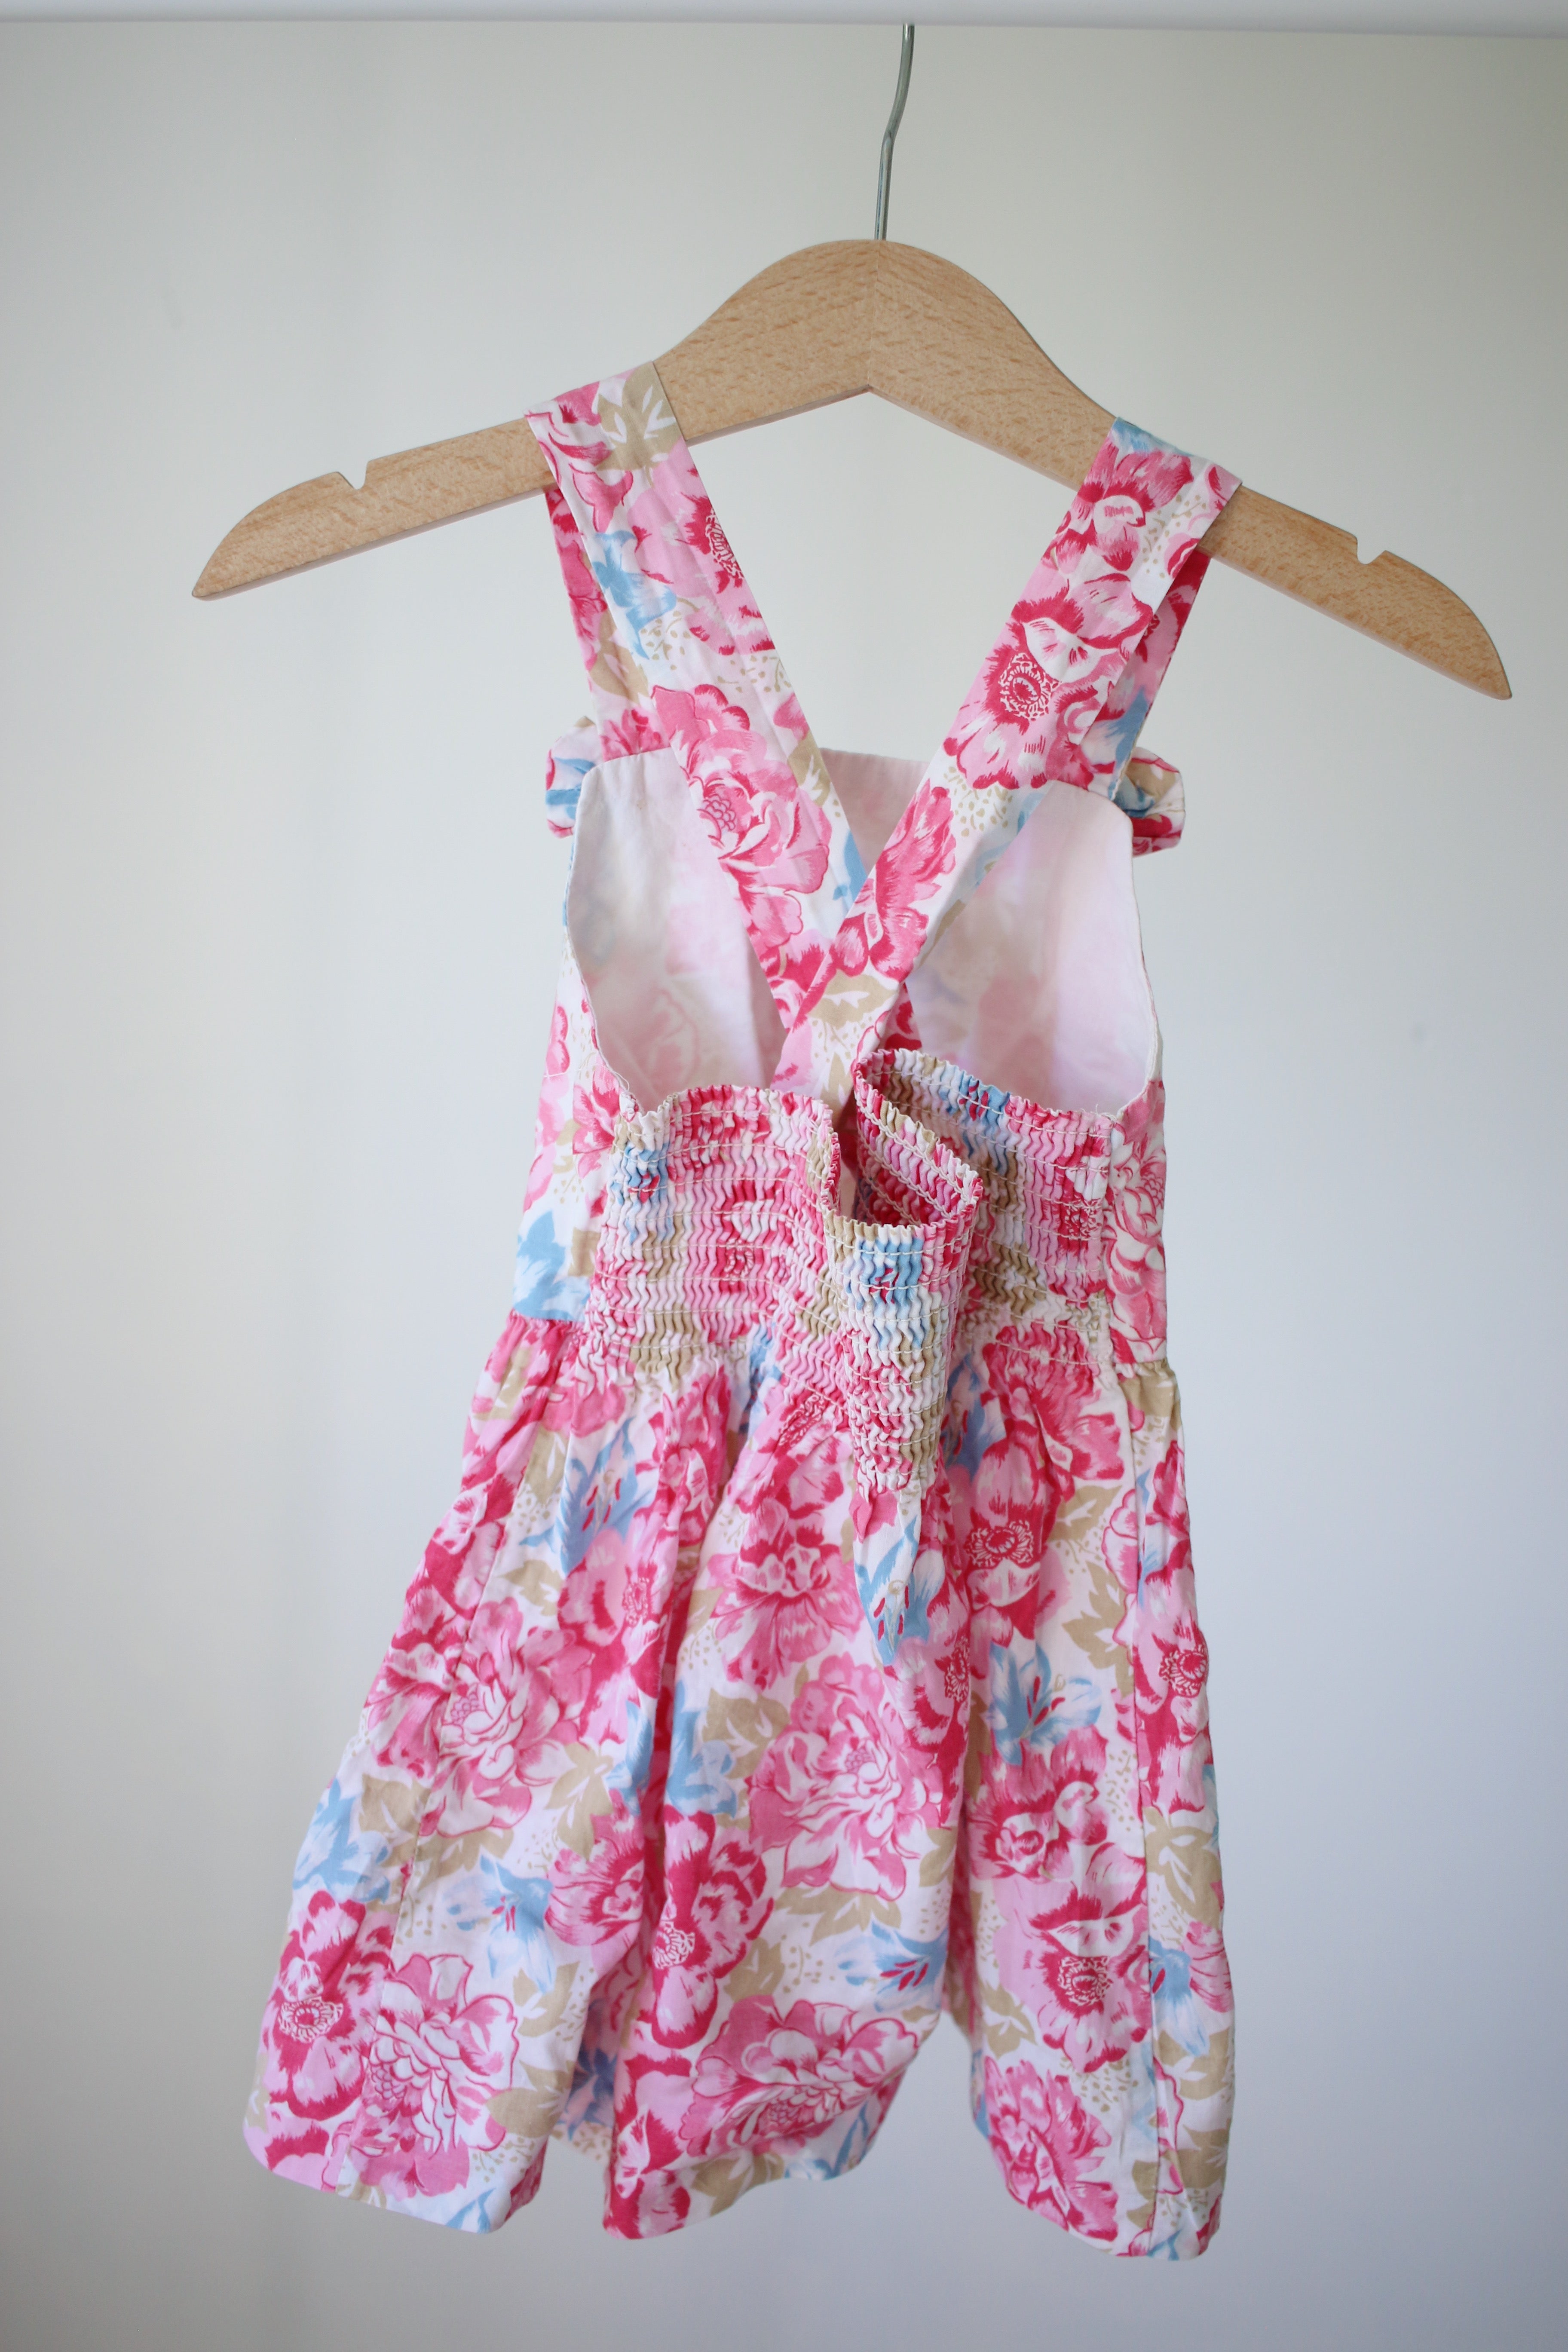 Vintage floral Laura Ashley baby dress - size 12 months - made in UK